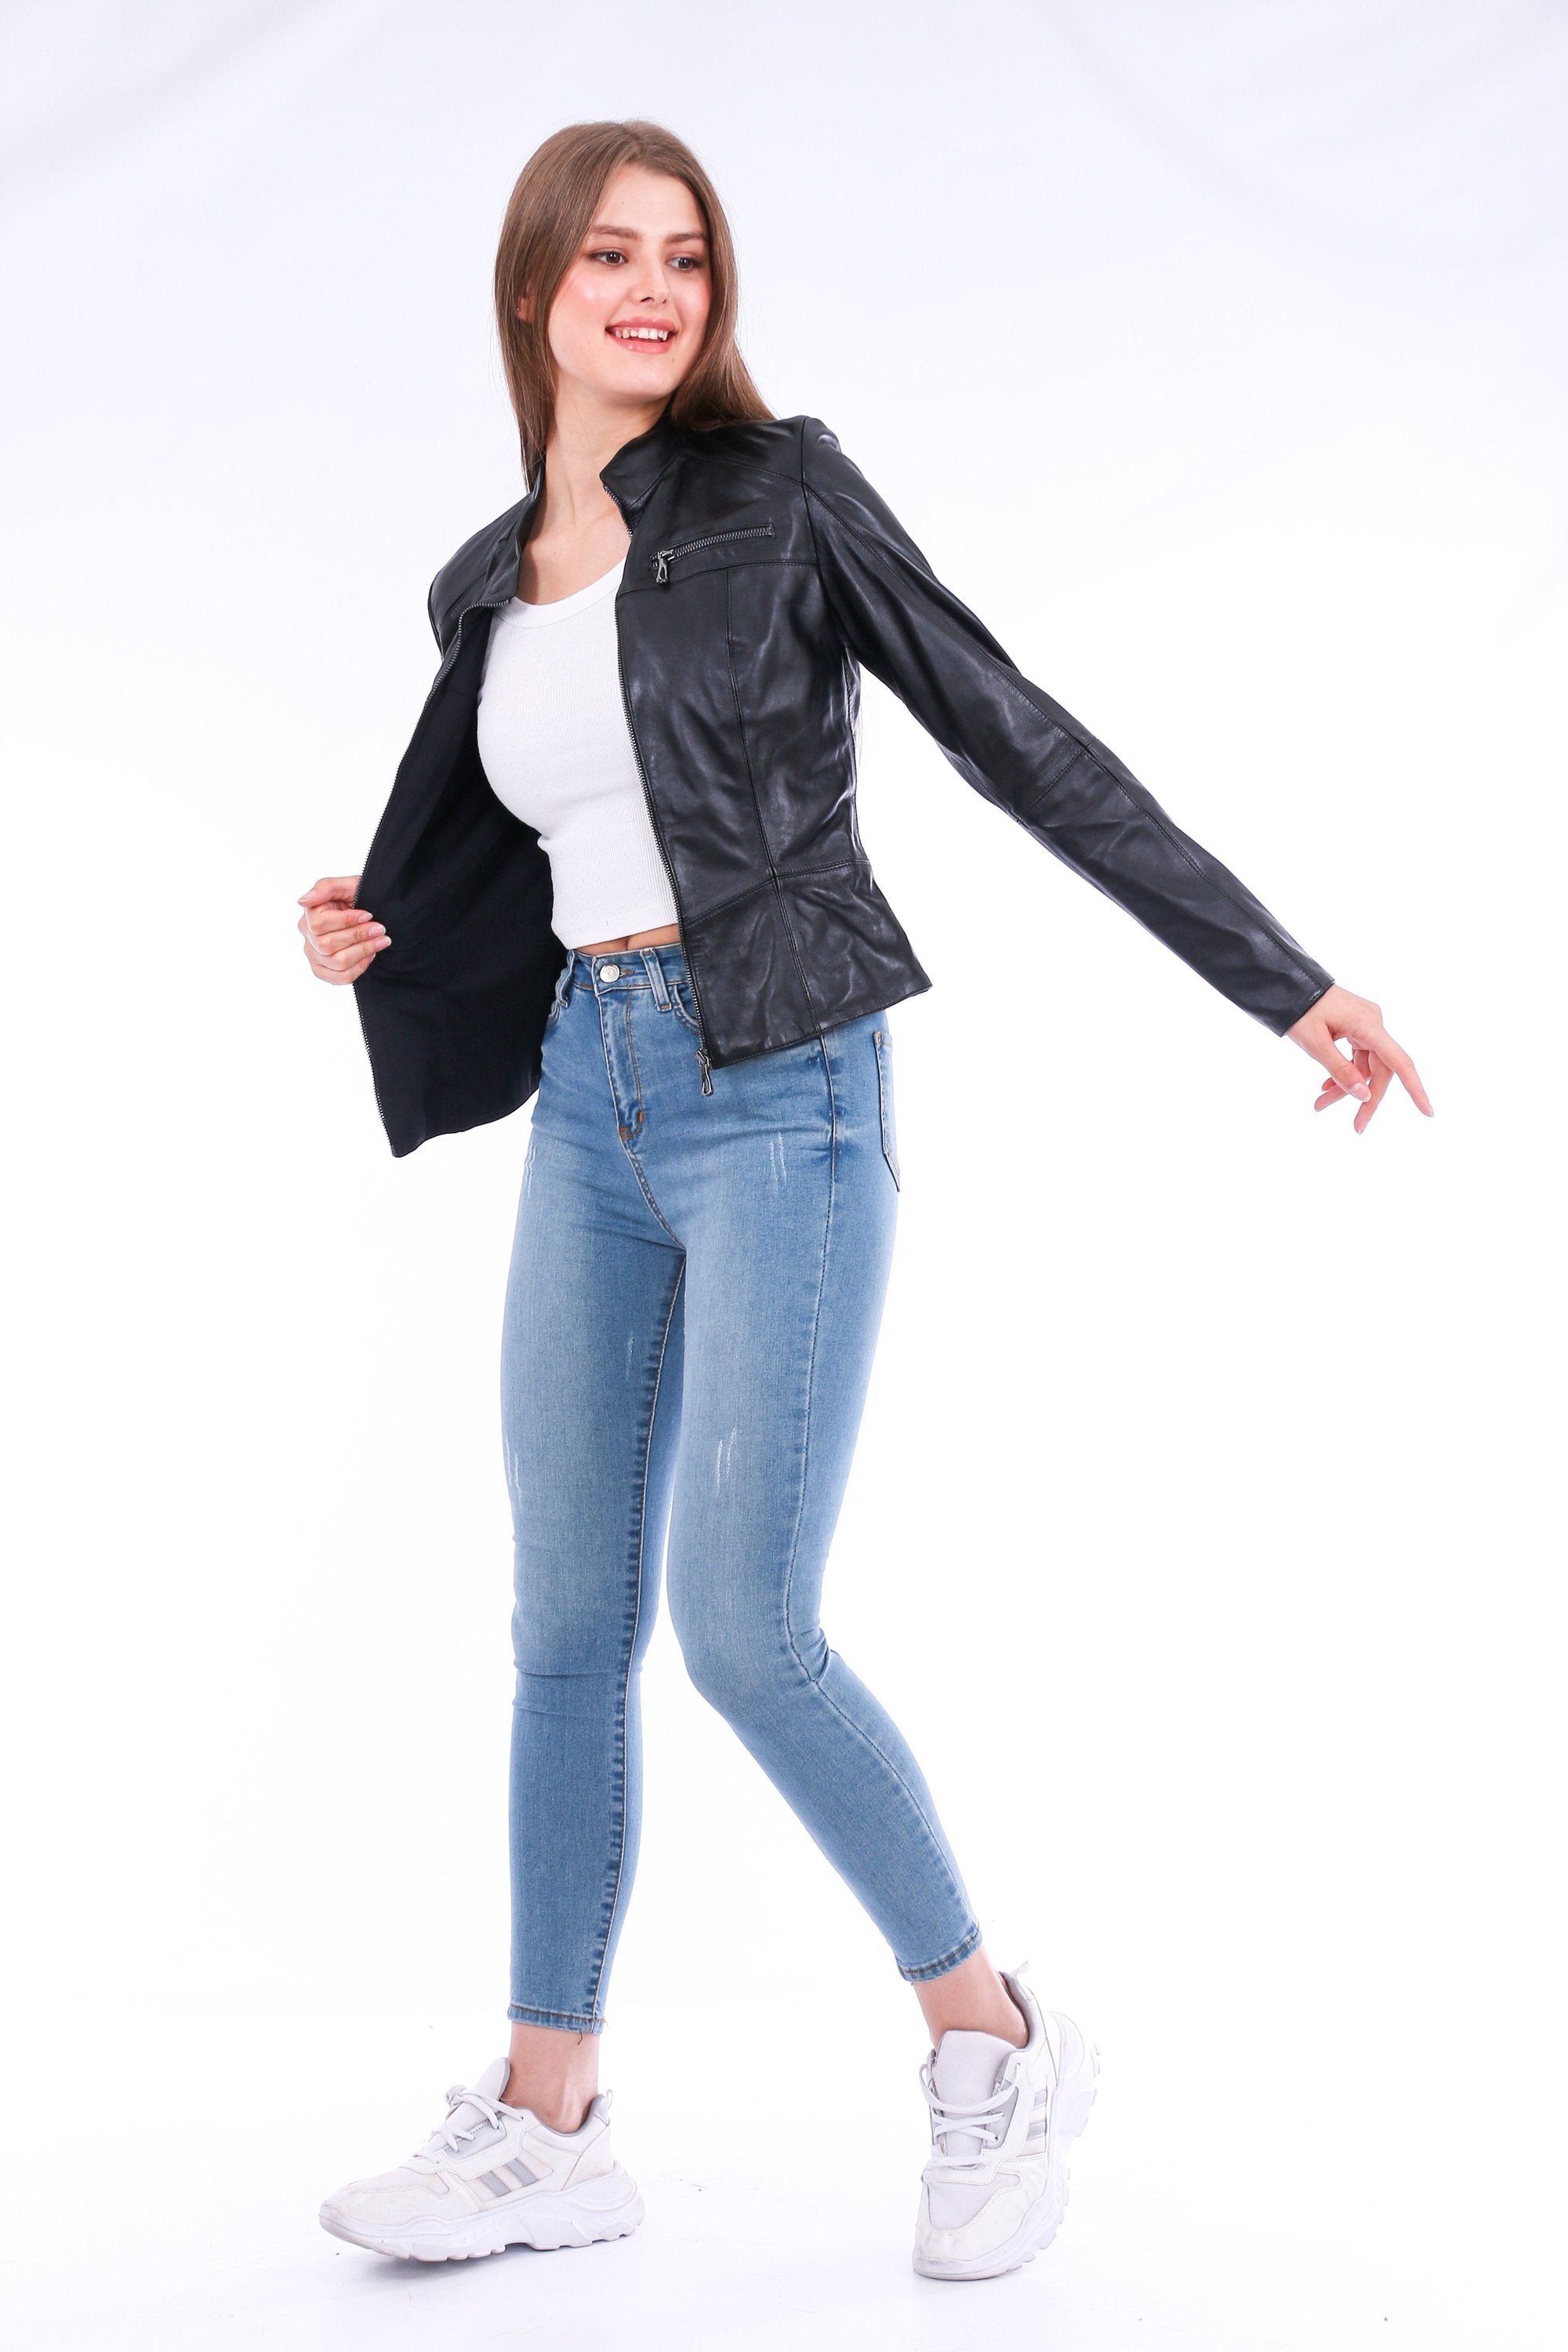 Picture of a Women's Genuine Black Leather Biker Jacket side view action shot